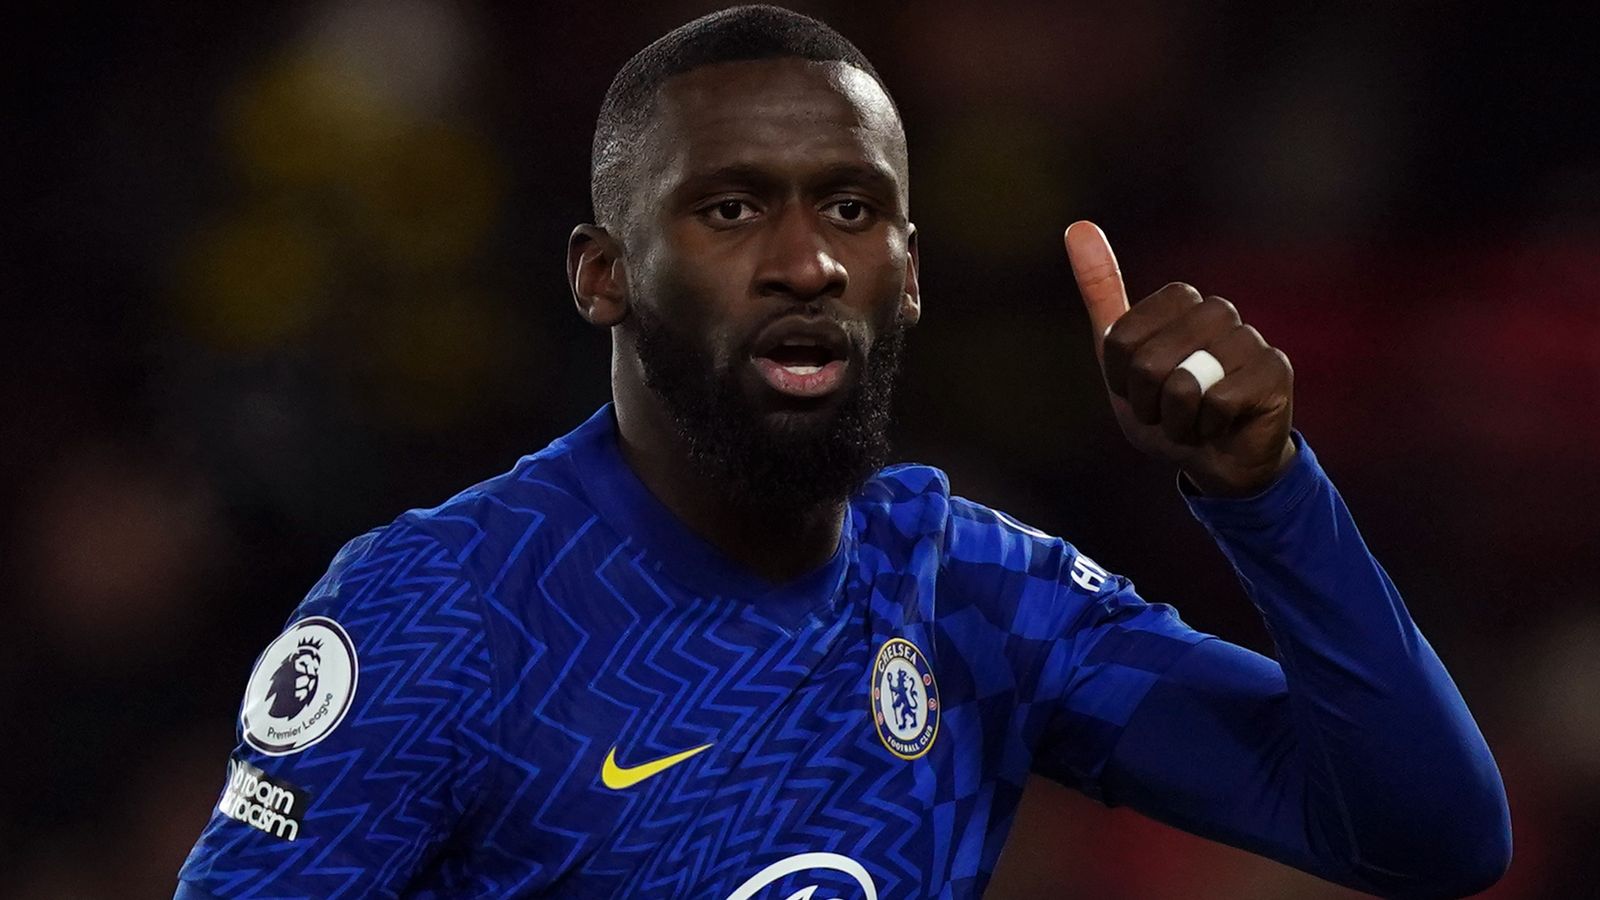 Antonio Rudiger: Real Madrid to sign Chelsea defender on free transfer after agreeing four-year deal